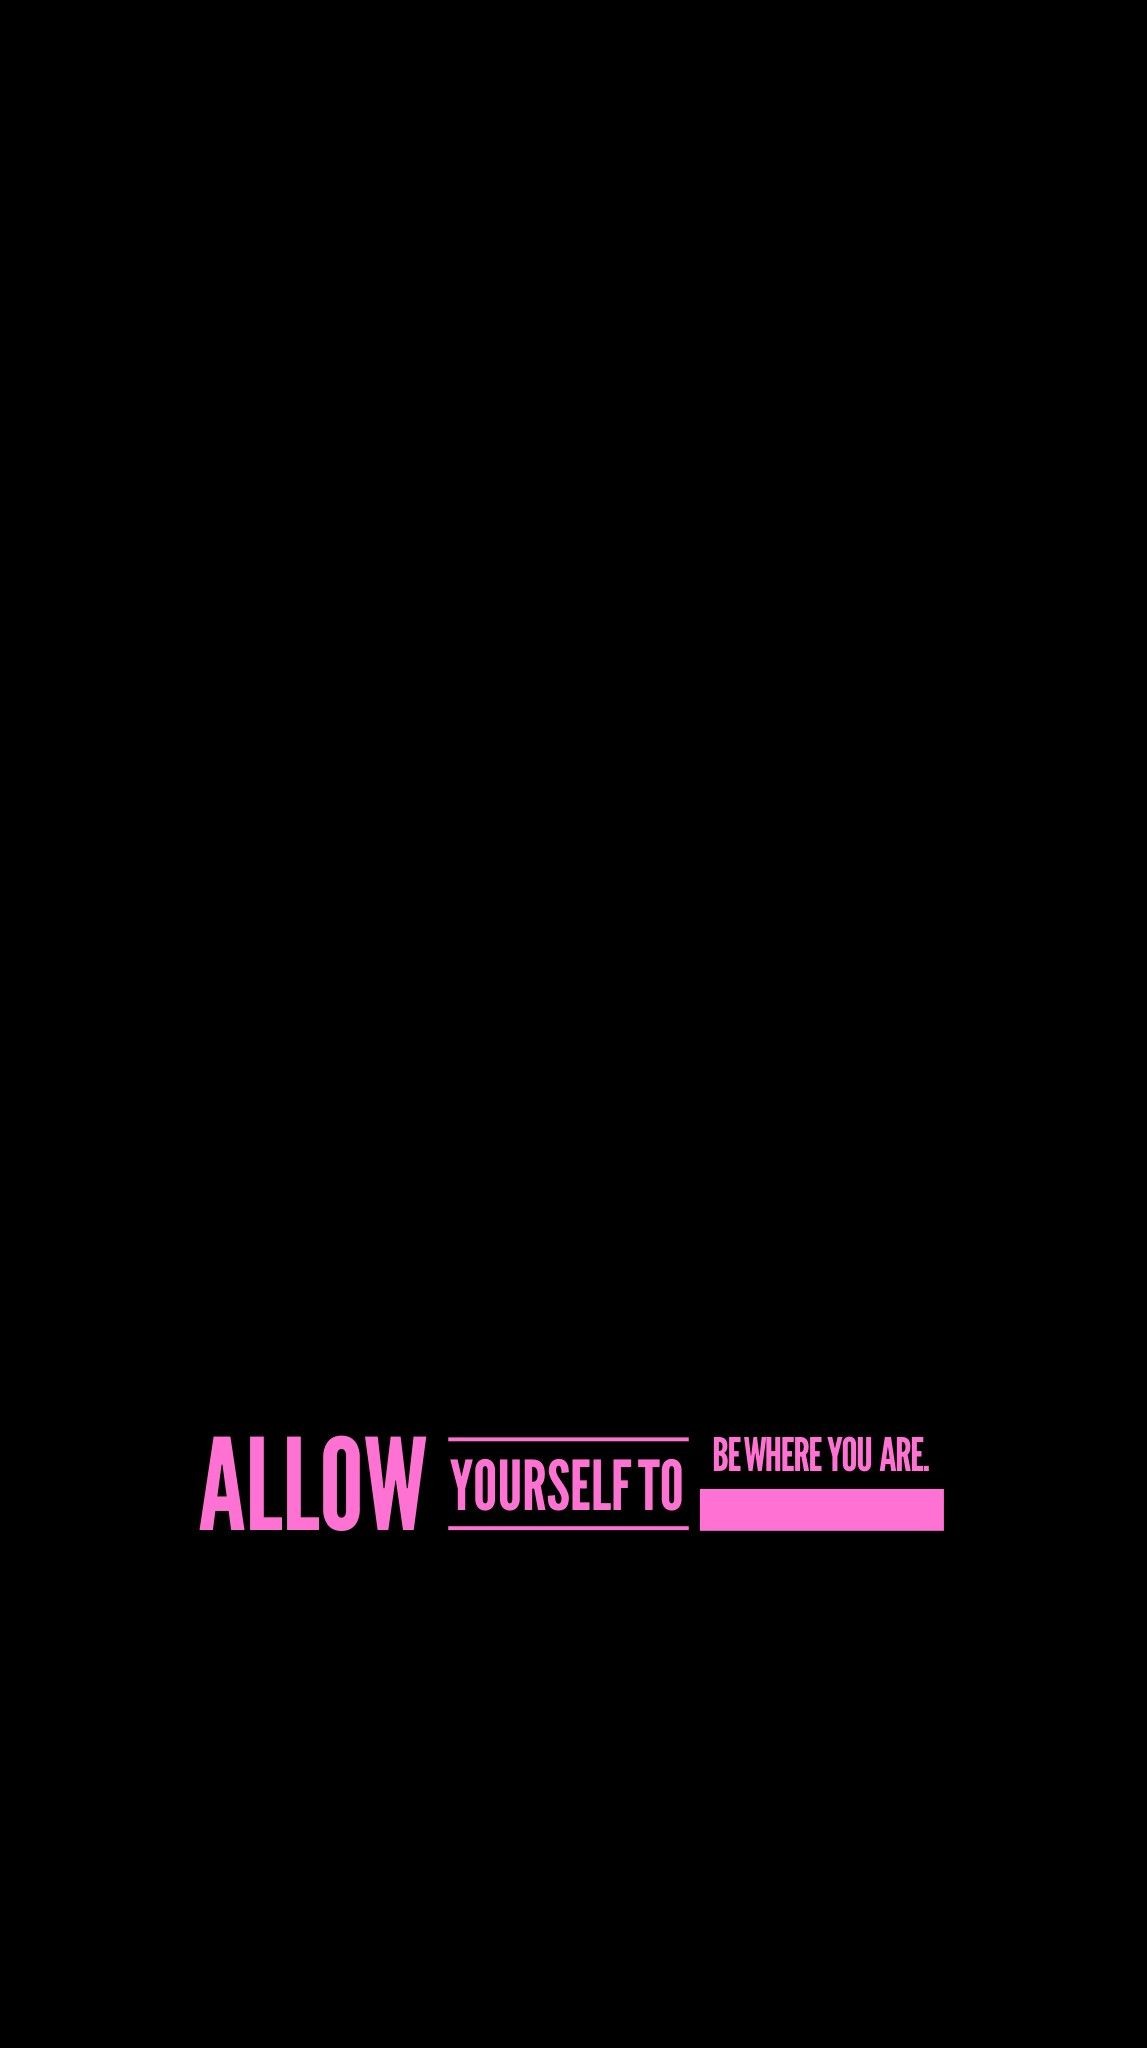 1147x2048 wallpaper, iPhone, Android, background, quote, simple, black, pink .